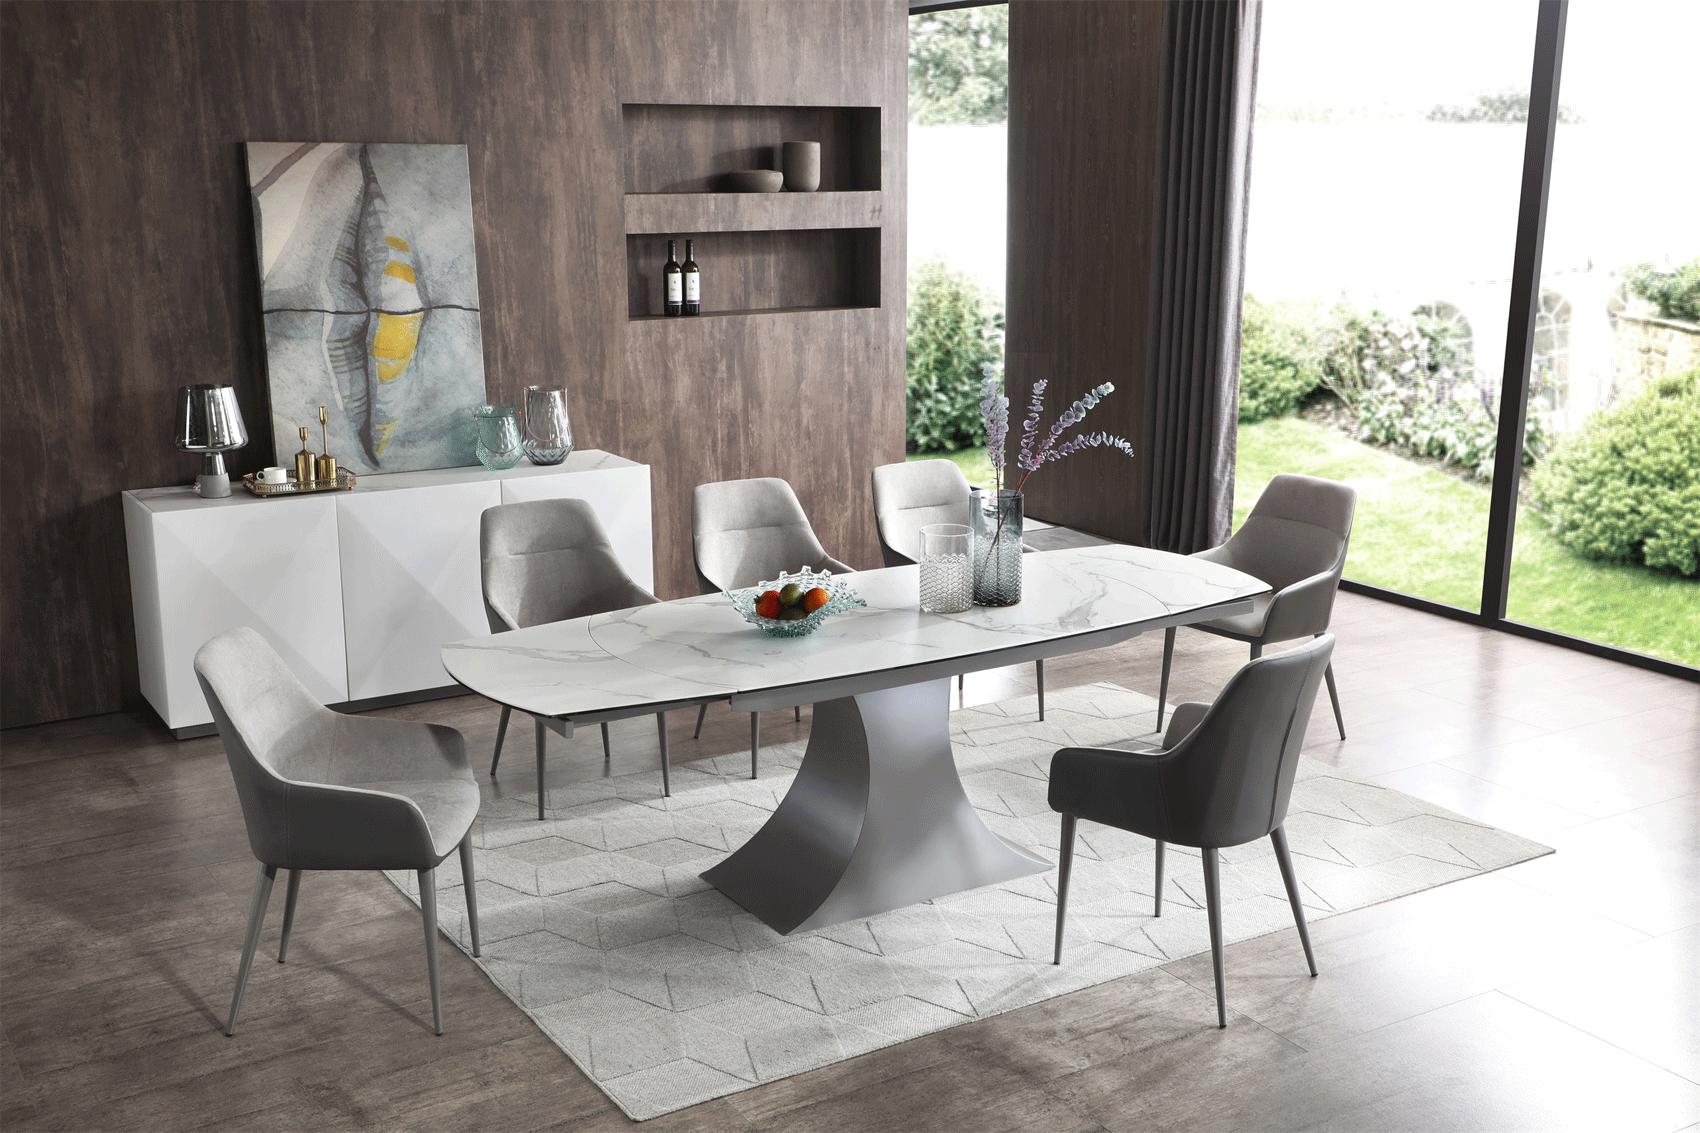 Contemporary Dining Table Set 9035DININGTABLE 9035DININGTABLE-5PC in Gray Fabric